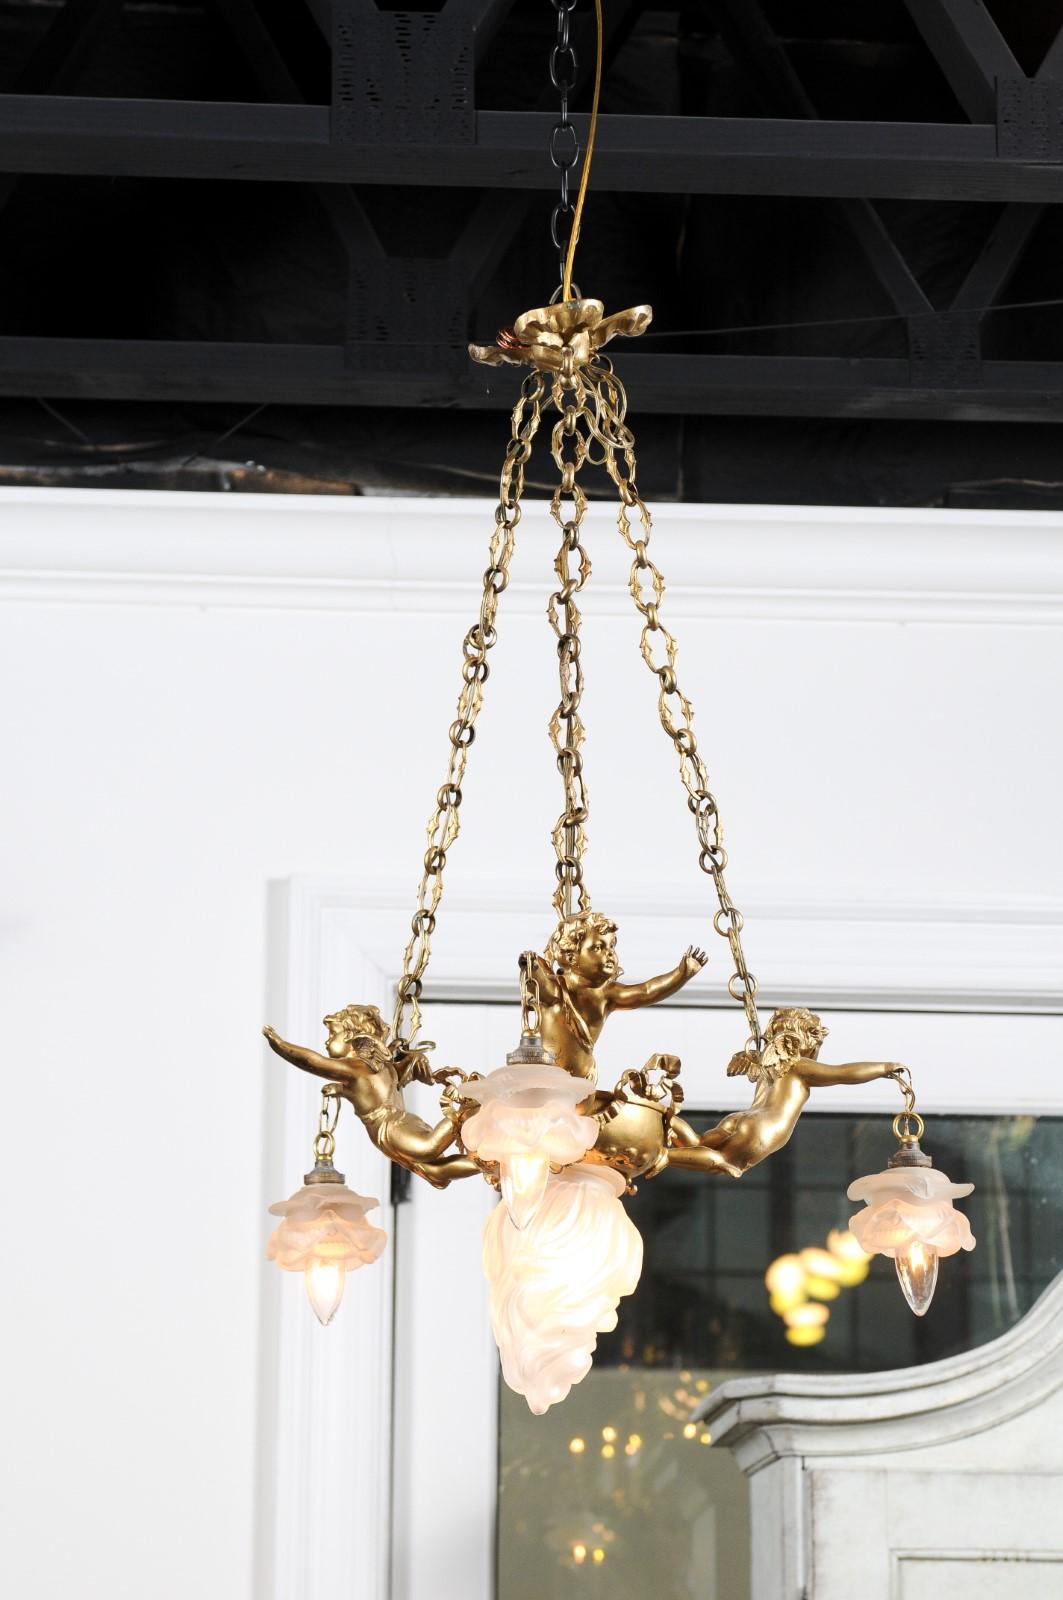 French 19th Century Gilt Metal Chandelier with Three Cherubs Holding the Lights In Good Condition For Sale In Atlanta, GA